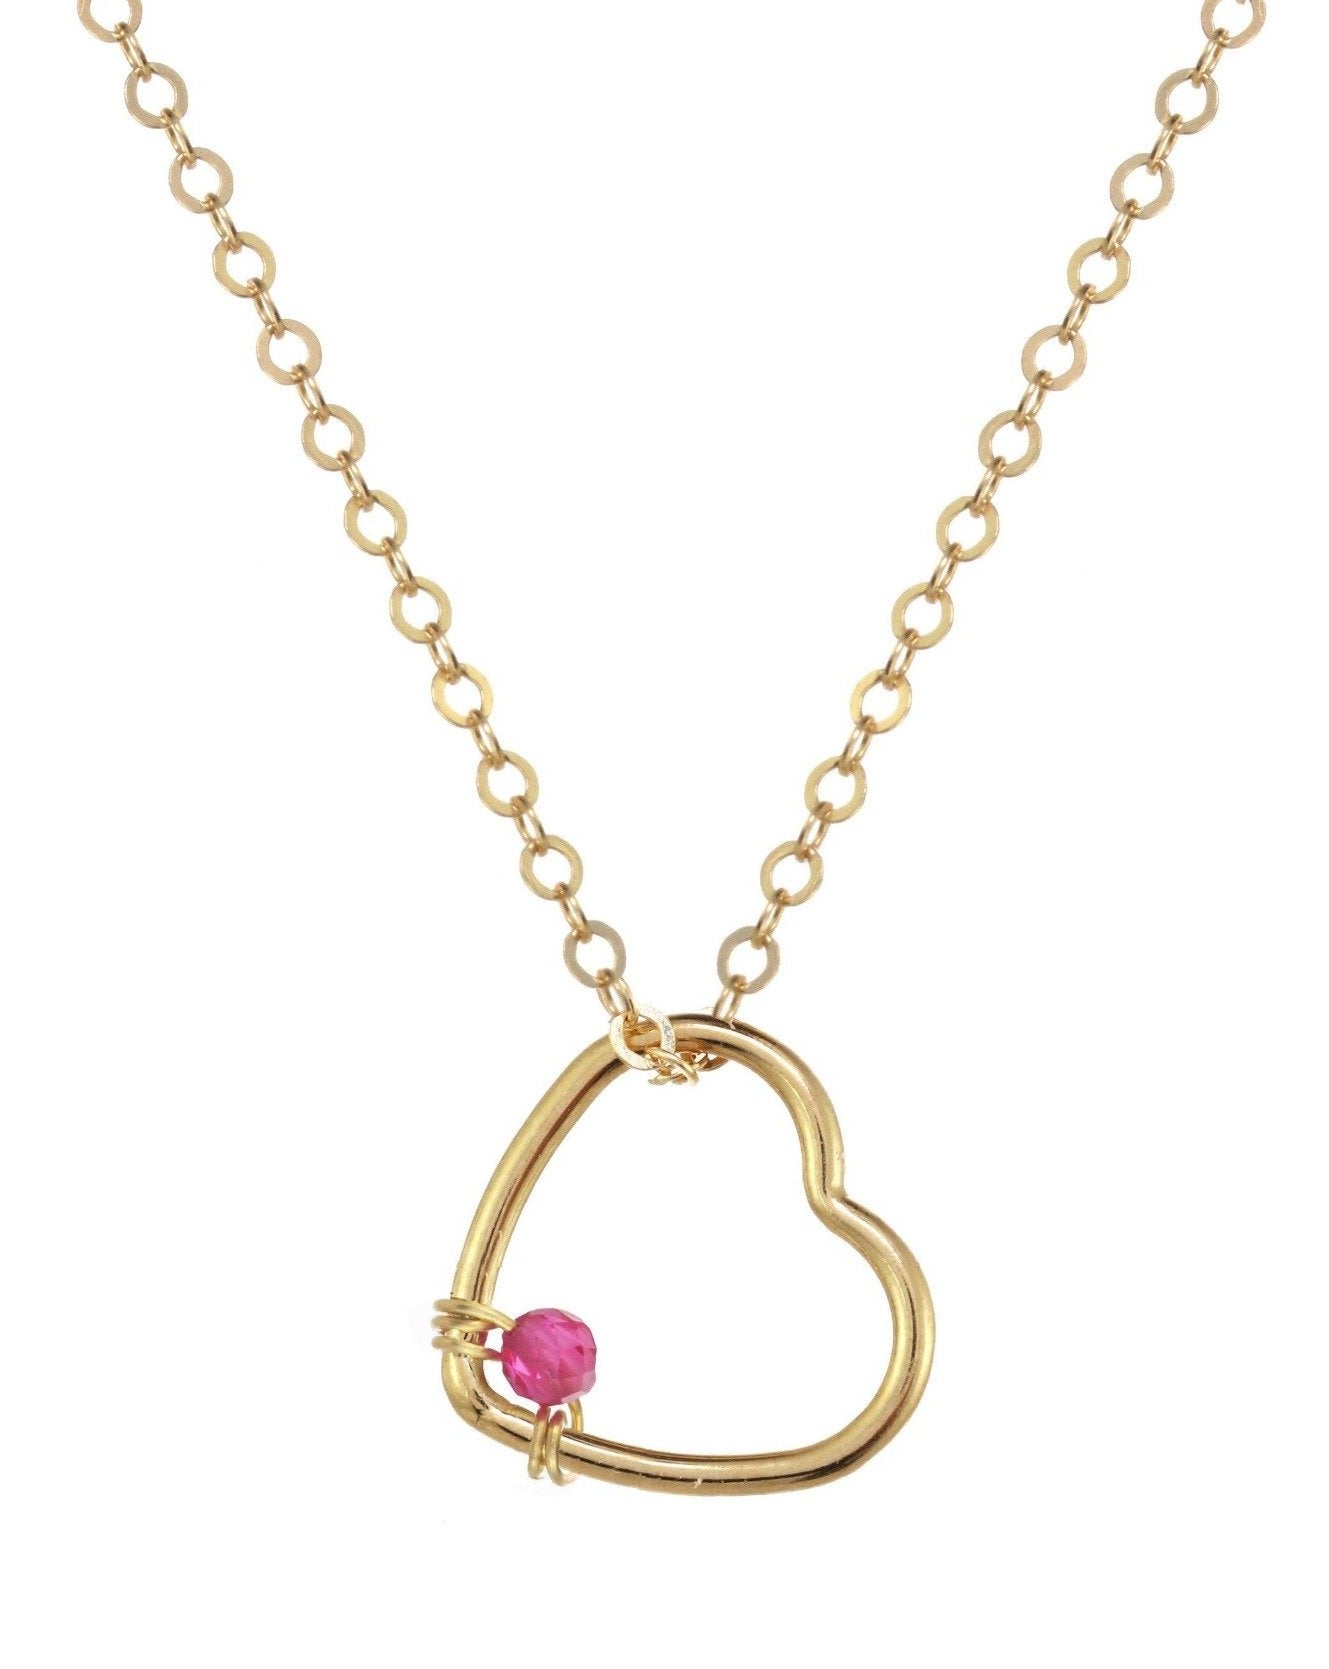 Amorcito Necklace by KOZAKH. A 16 to 18 inch adjustable length necklace in 14K Gold Filled, featuring a heart shaped charm with a round Ruby gem.